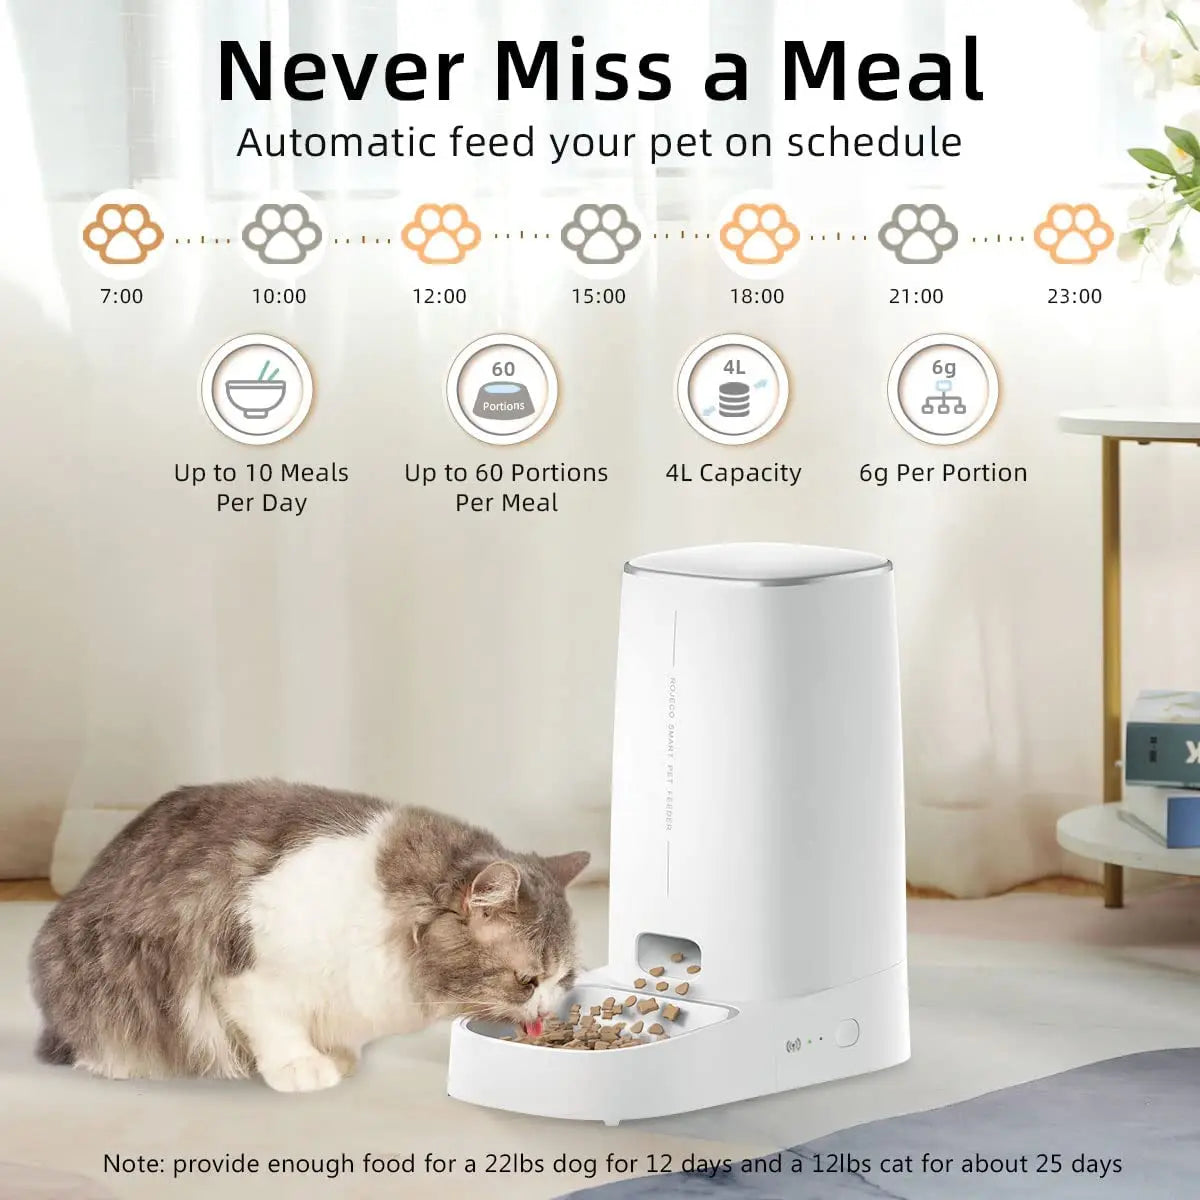 Automatic Cat Feeder Pet Smart WiFi kittens Food Kibble Dispenser Remote Control Auto Feeder For pets and cats Dry Food Accessories, useful  dog feeder